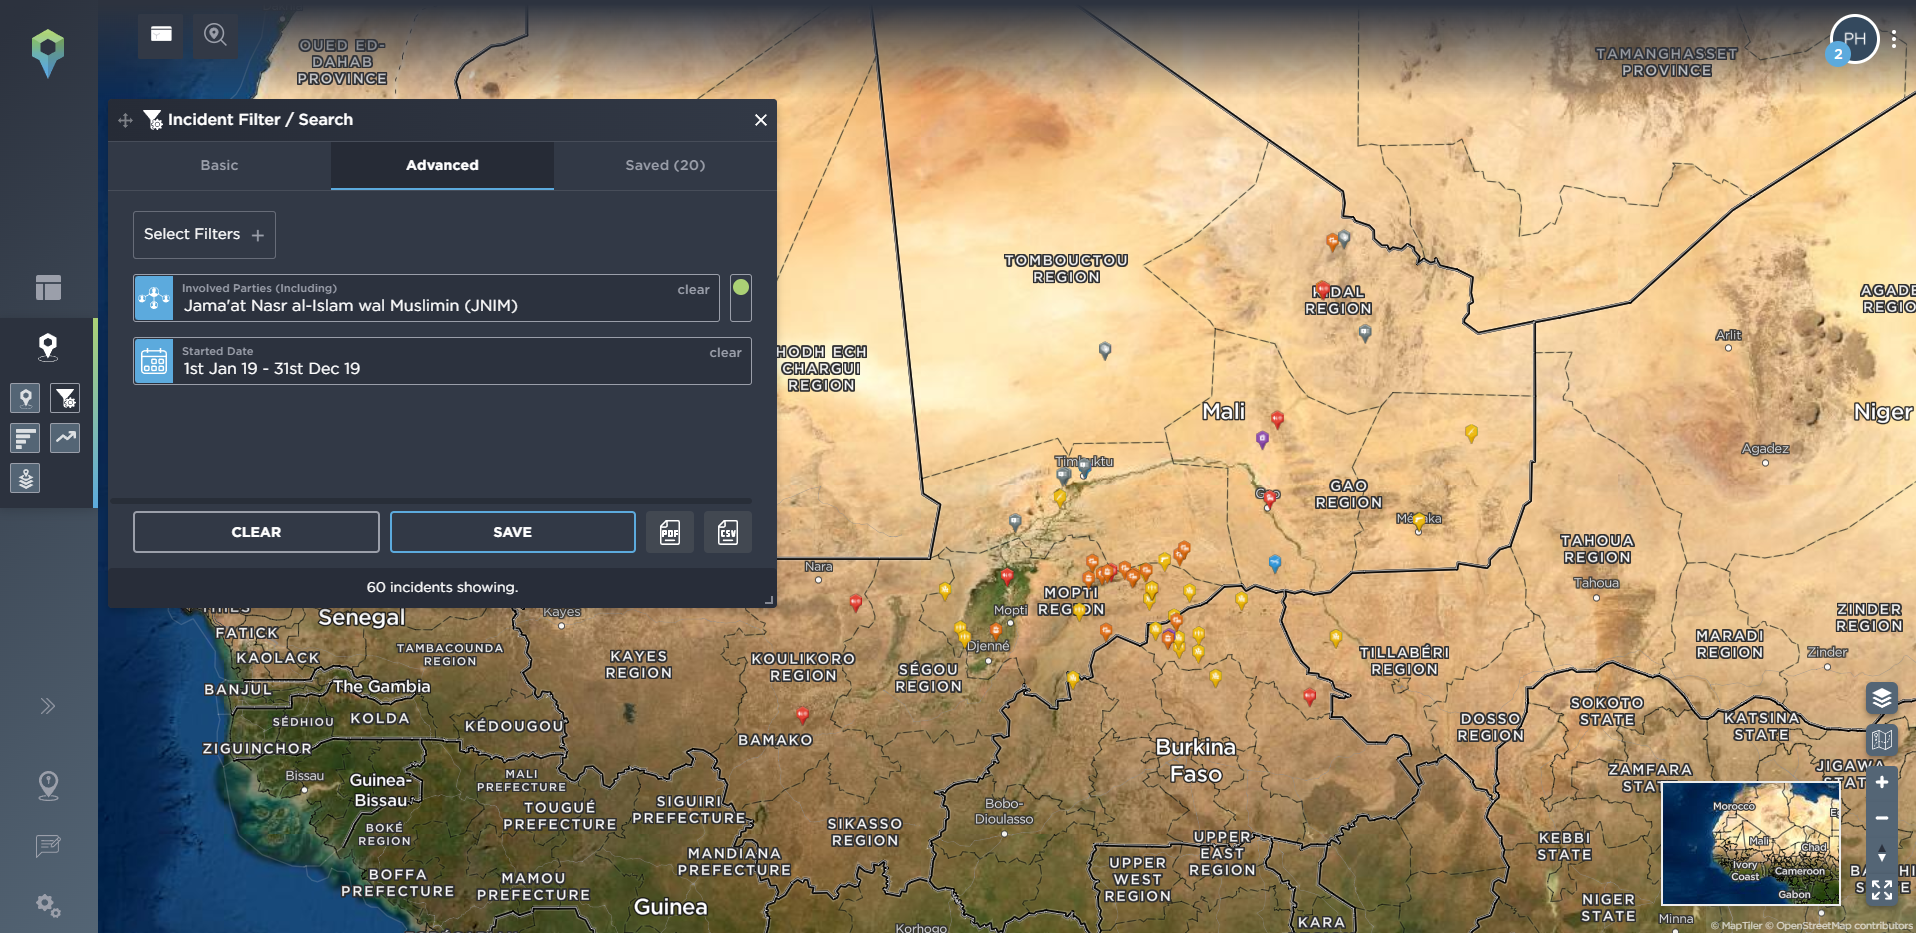 Tracking the spread of armed conflict activity of insurgent jihadist groups using threat intelligence software, involved party JNIM Al-Qaeda Sahel